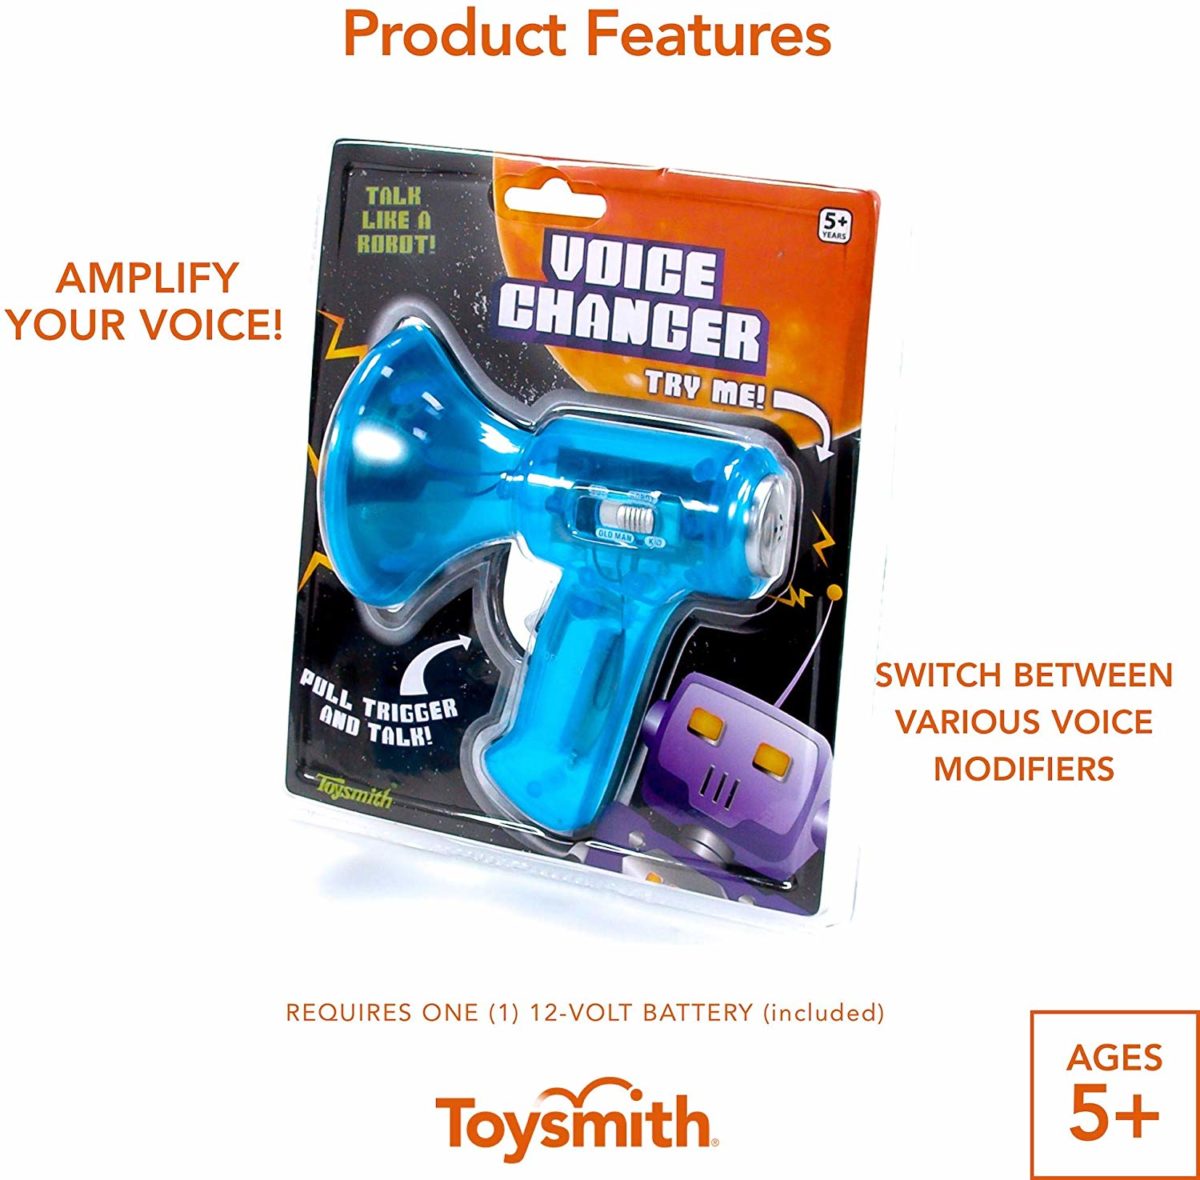 Toysmith 3.5 Inch Small Voice Changer - Top Toys and Gifts for Seven Year Old Boys 2